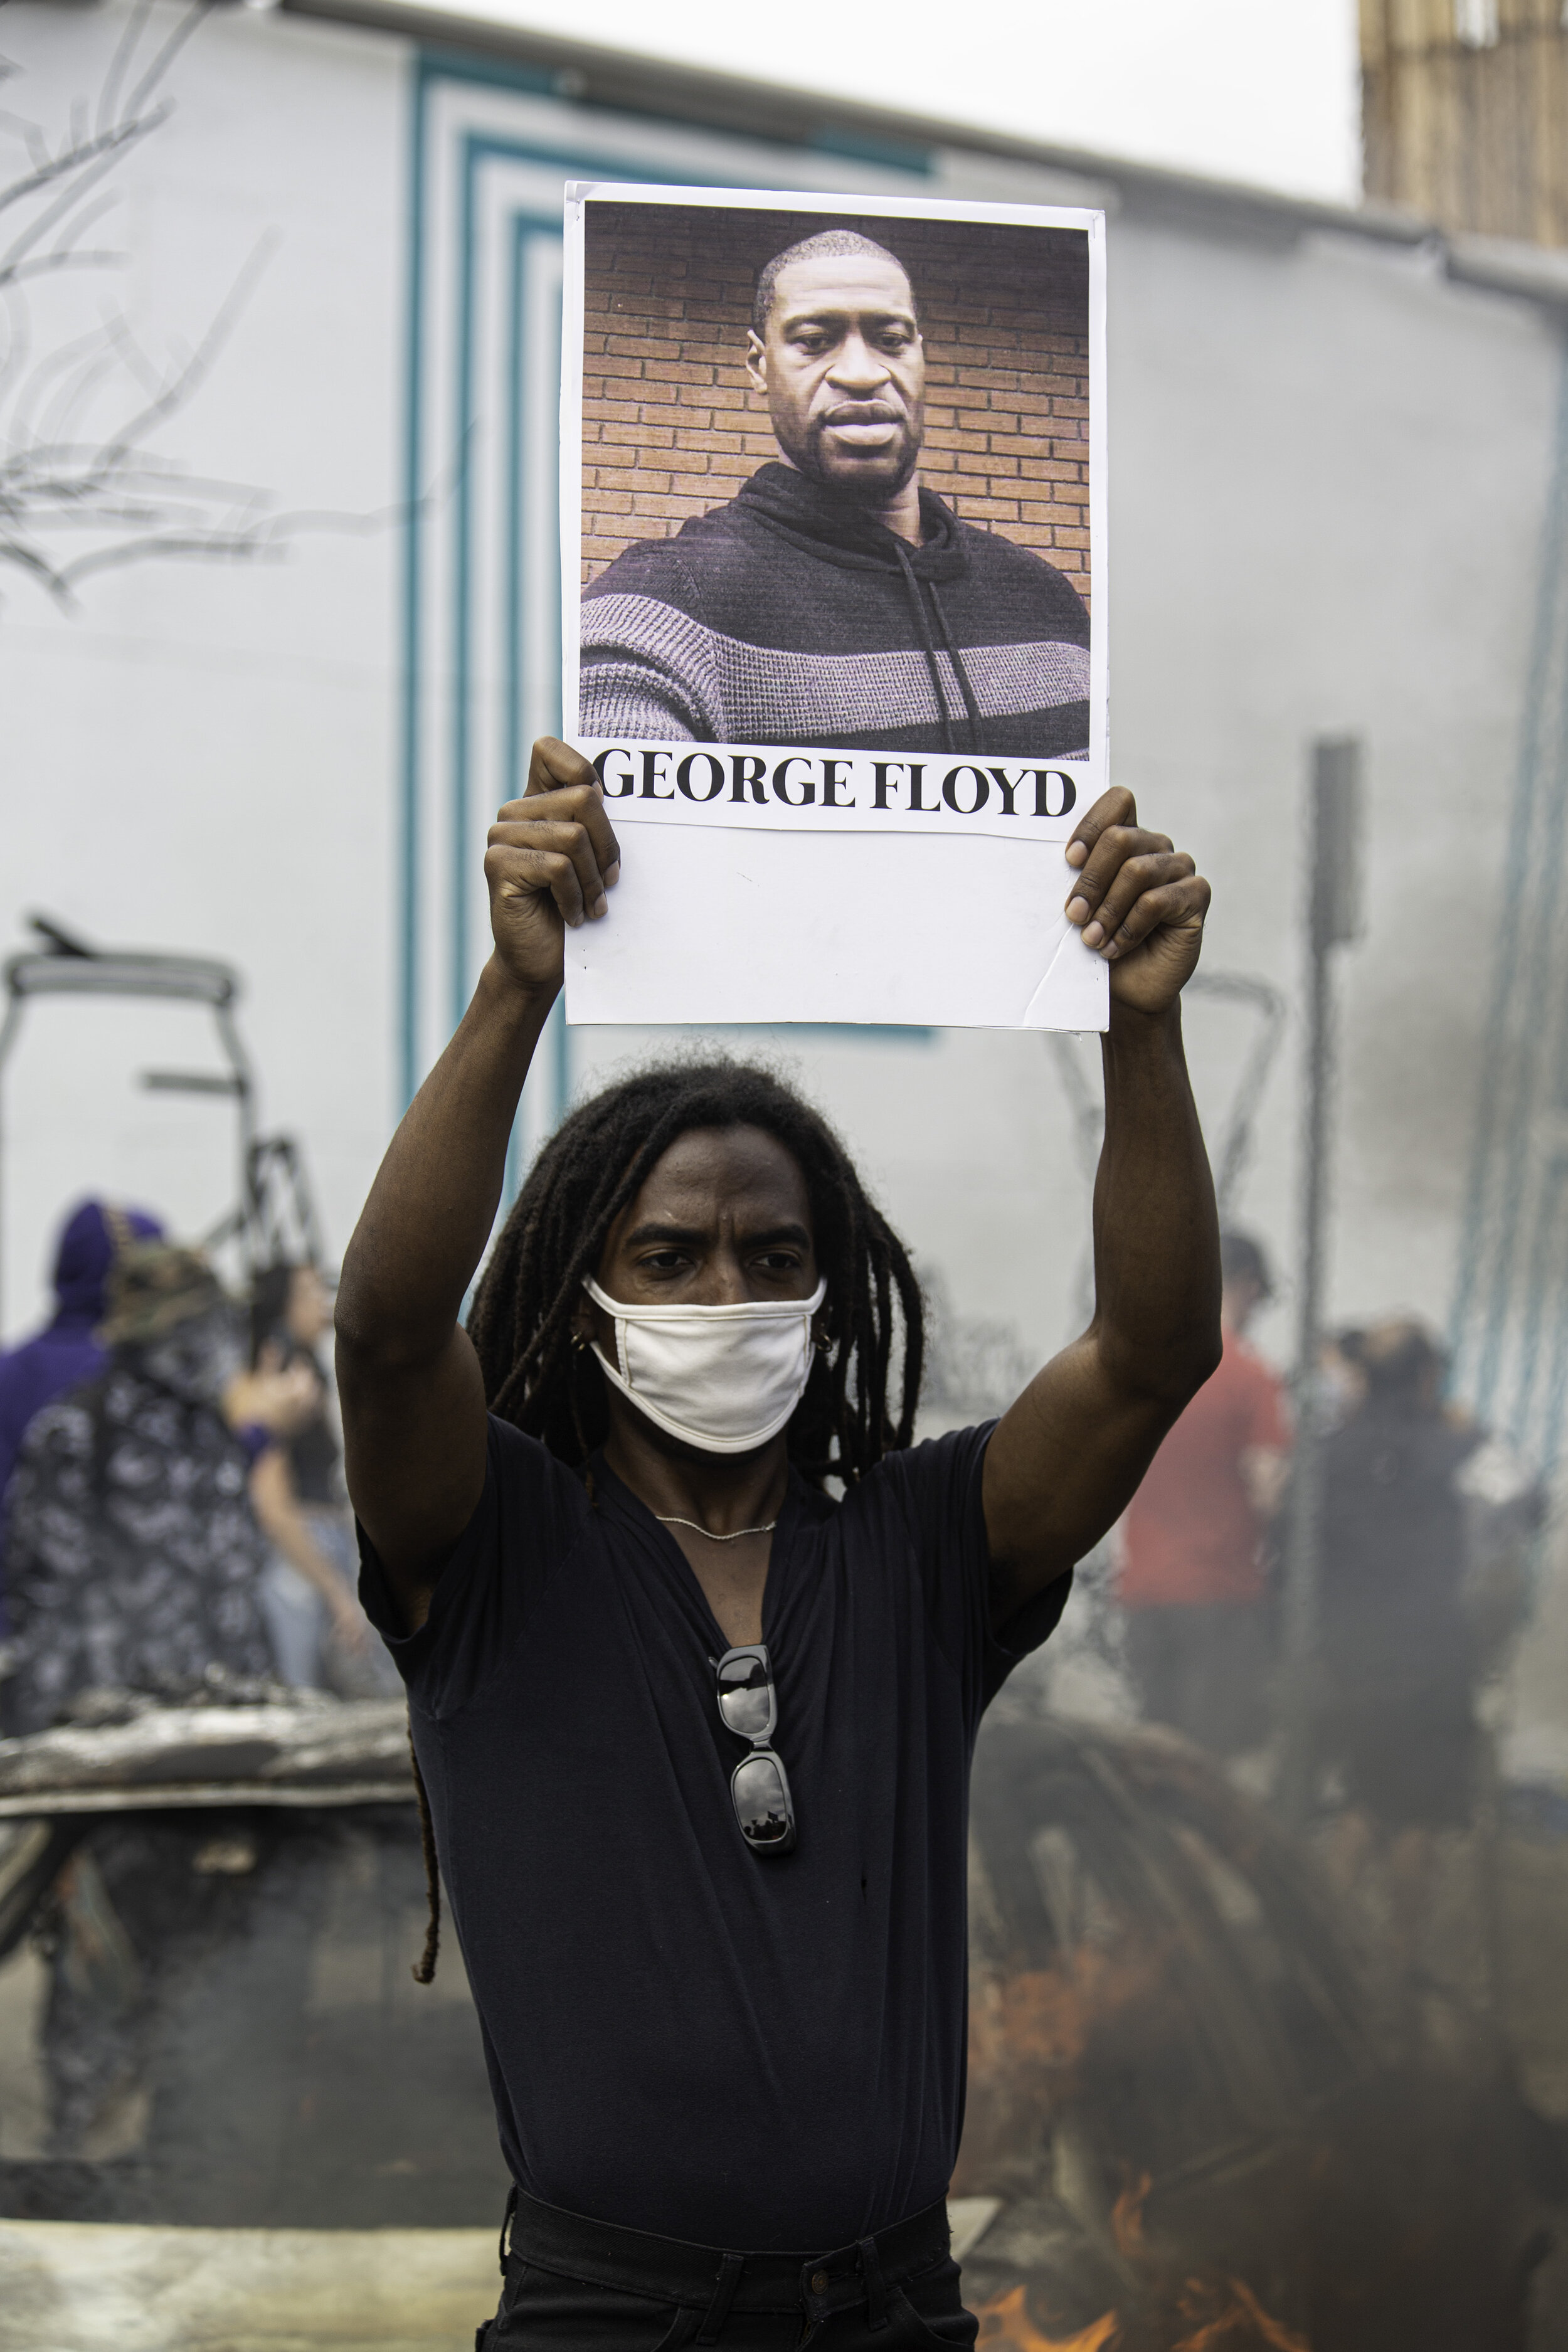   A protester holds a picture of George Floyd on Saturday, May 30, 2020, in Los Angeles, Calif. Floyd was killed by police in Minneapolis, MN on May 25, and within a few days protests erupted all over the country.  